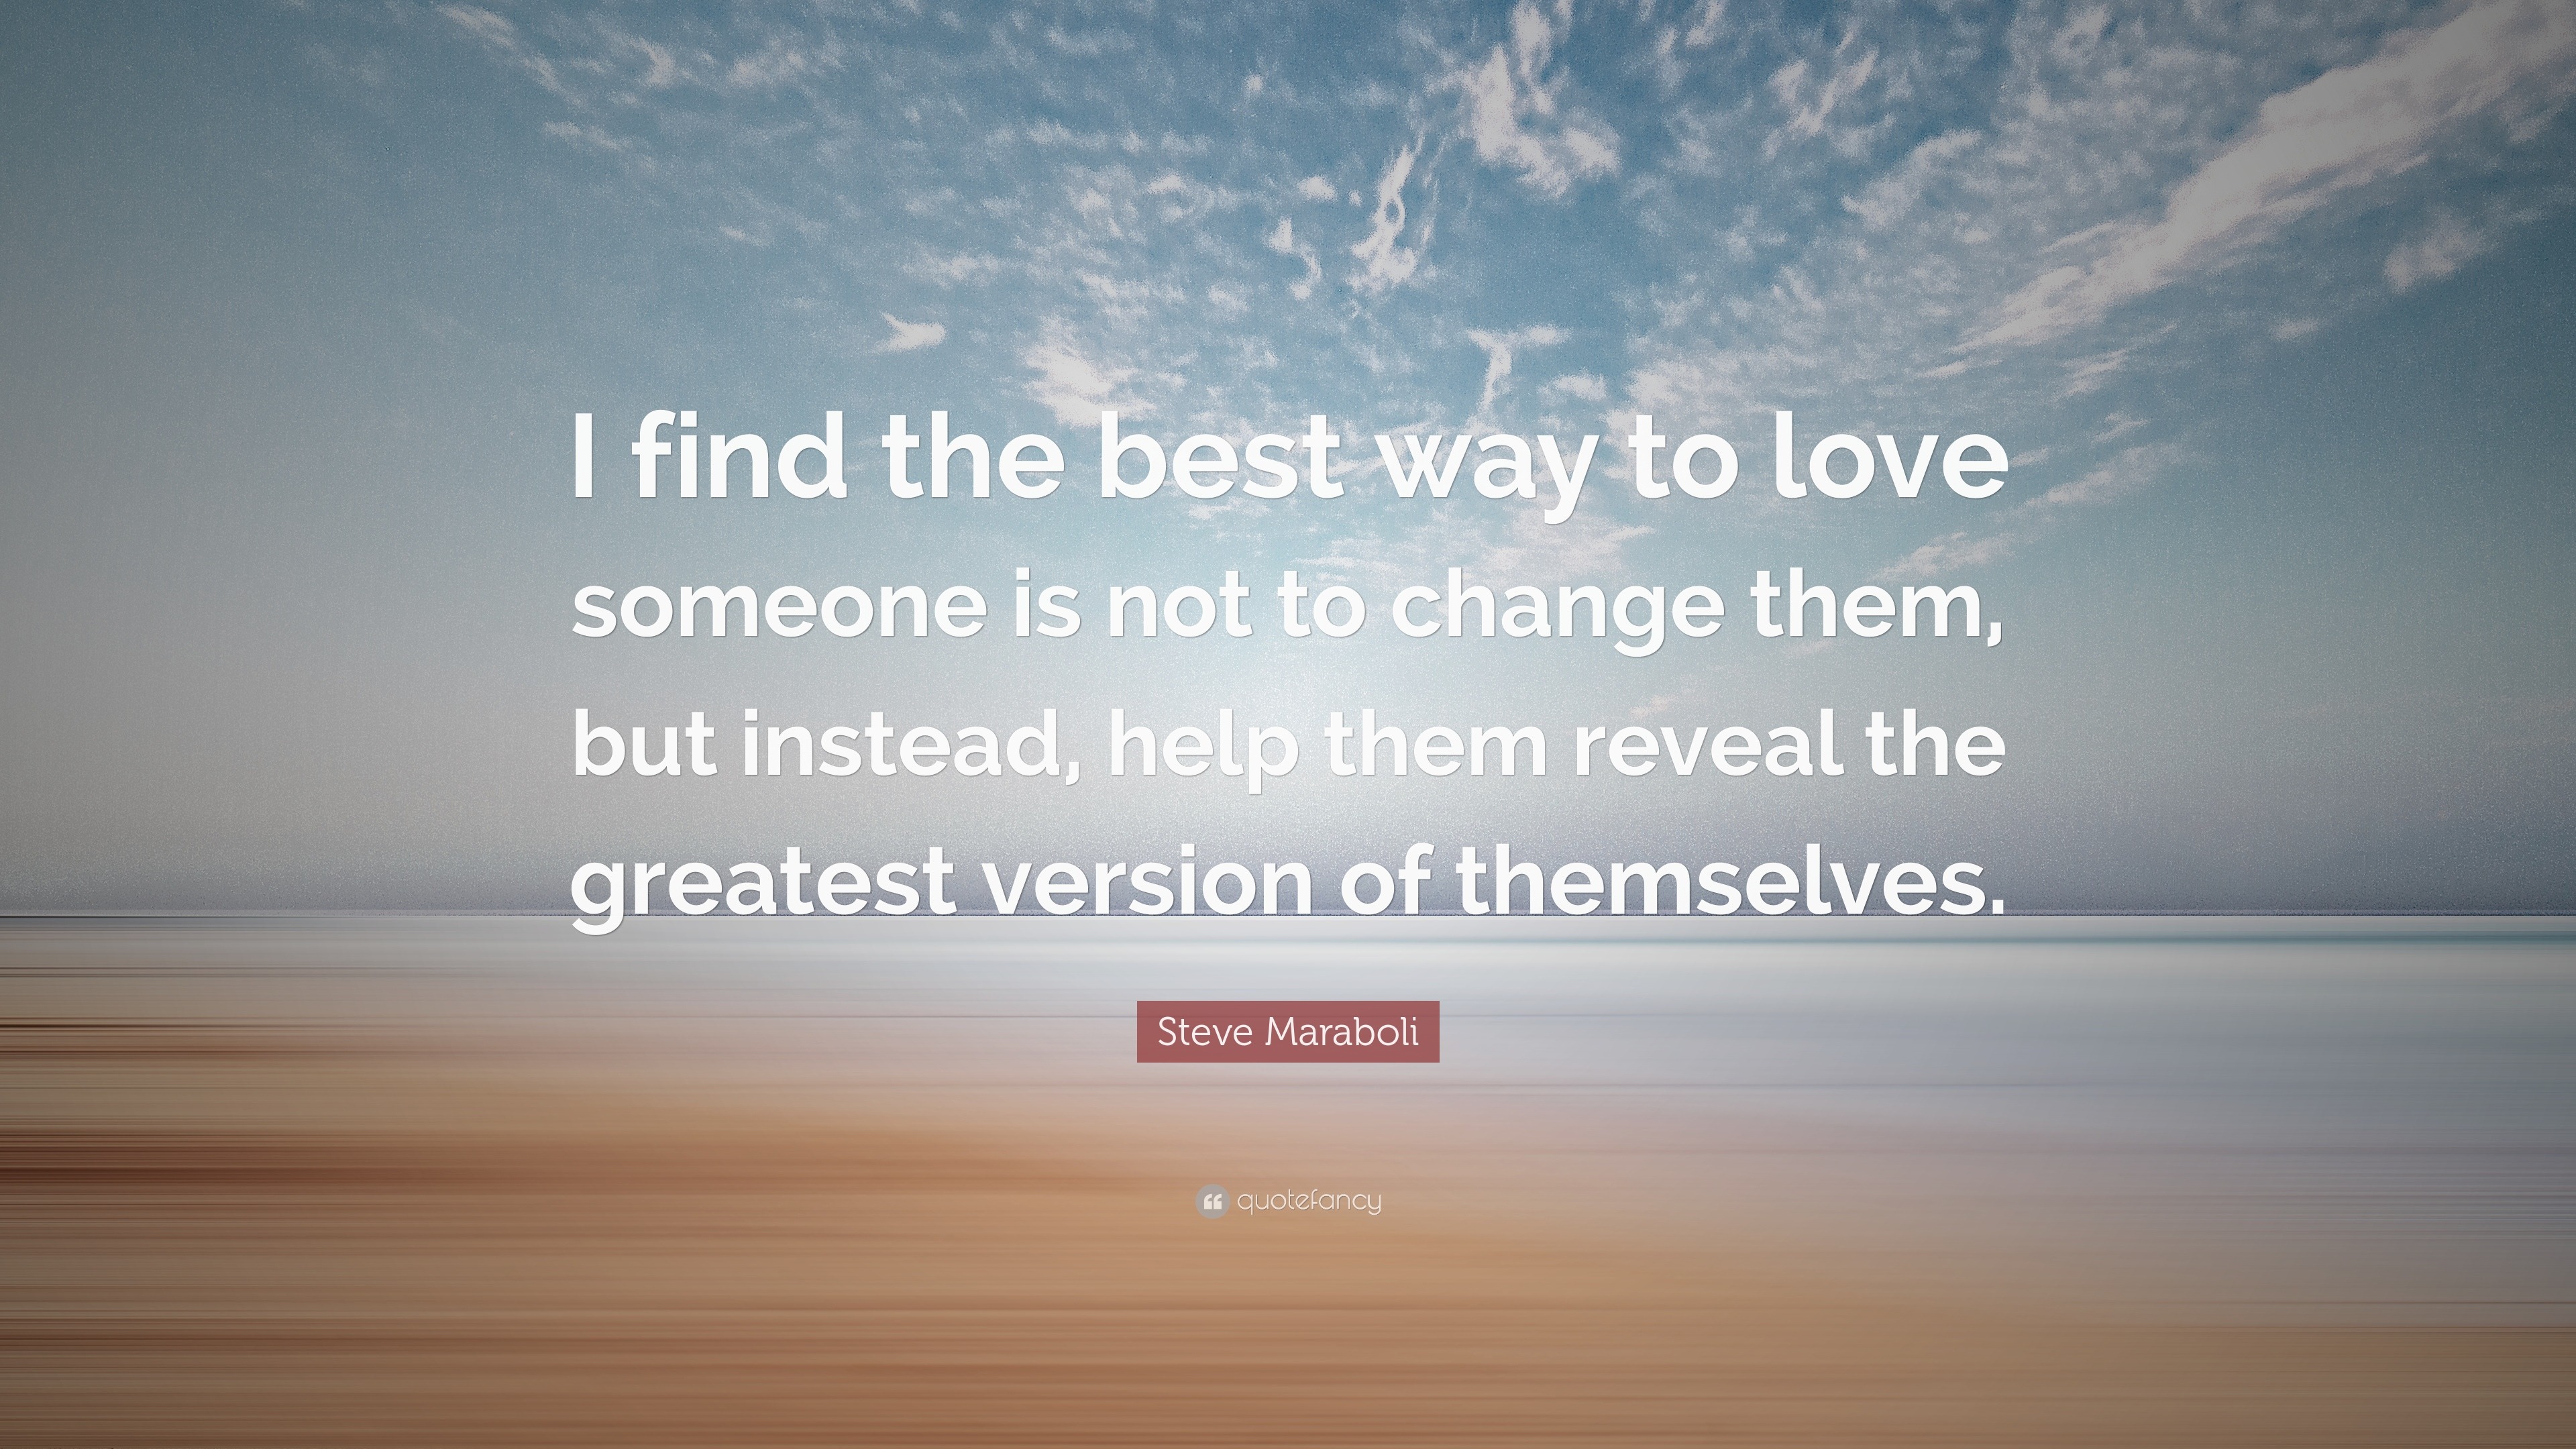 Steve Maraboli Quote: “I find the best way to love someone is not to ...